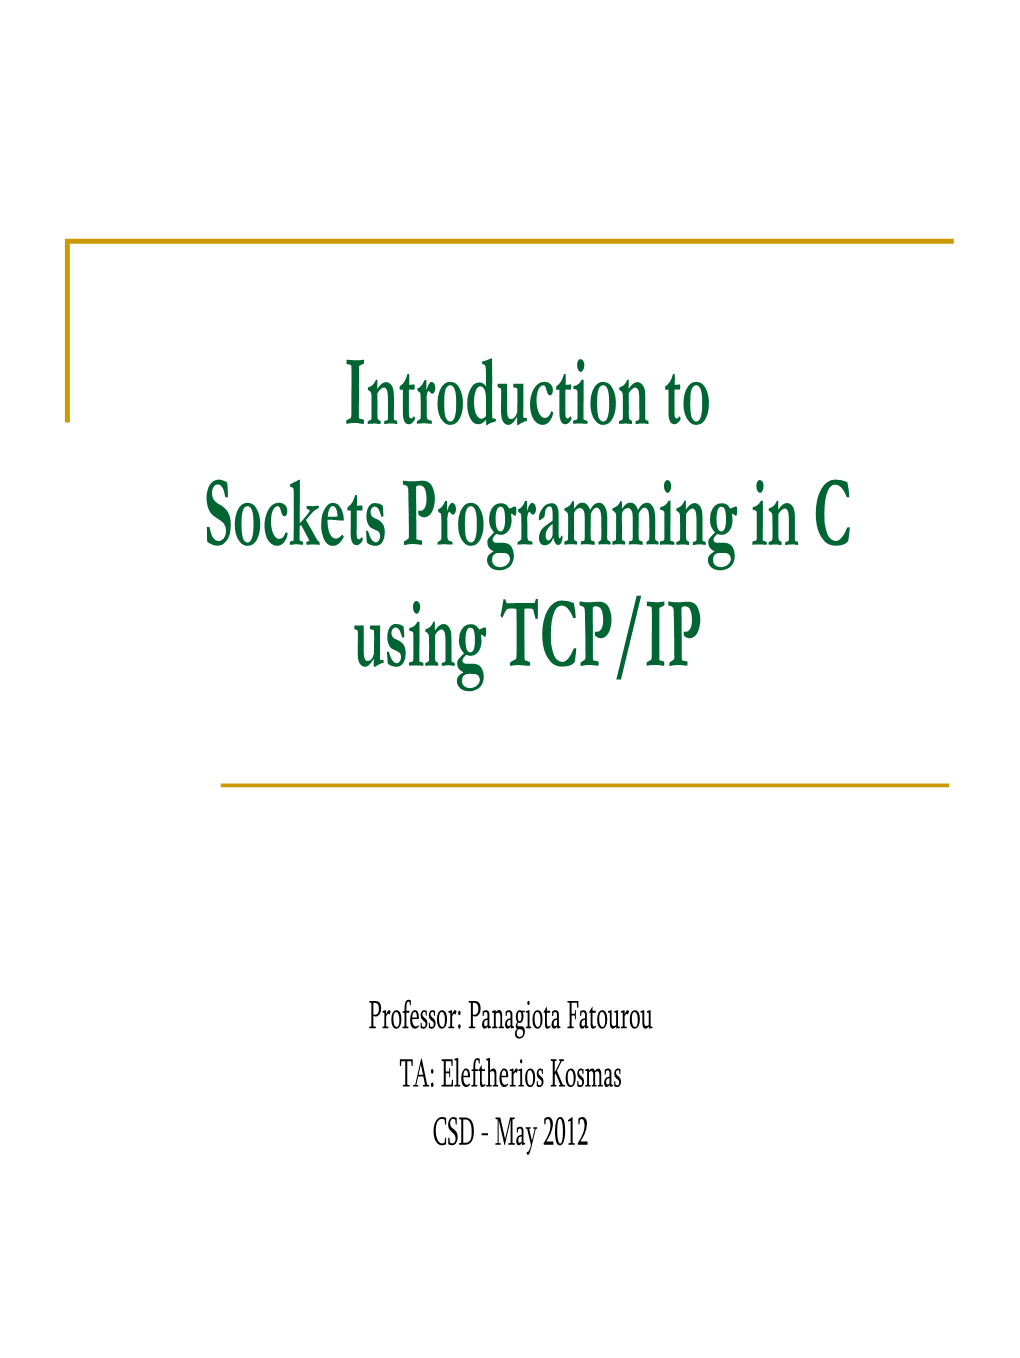 Introduction to Sockets Programming in C Using TCP/IP